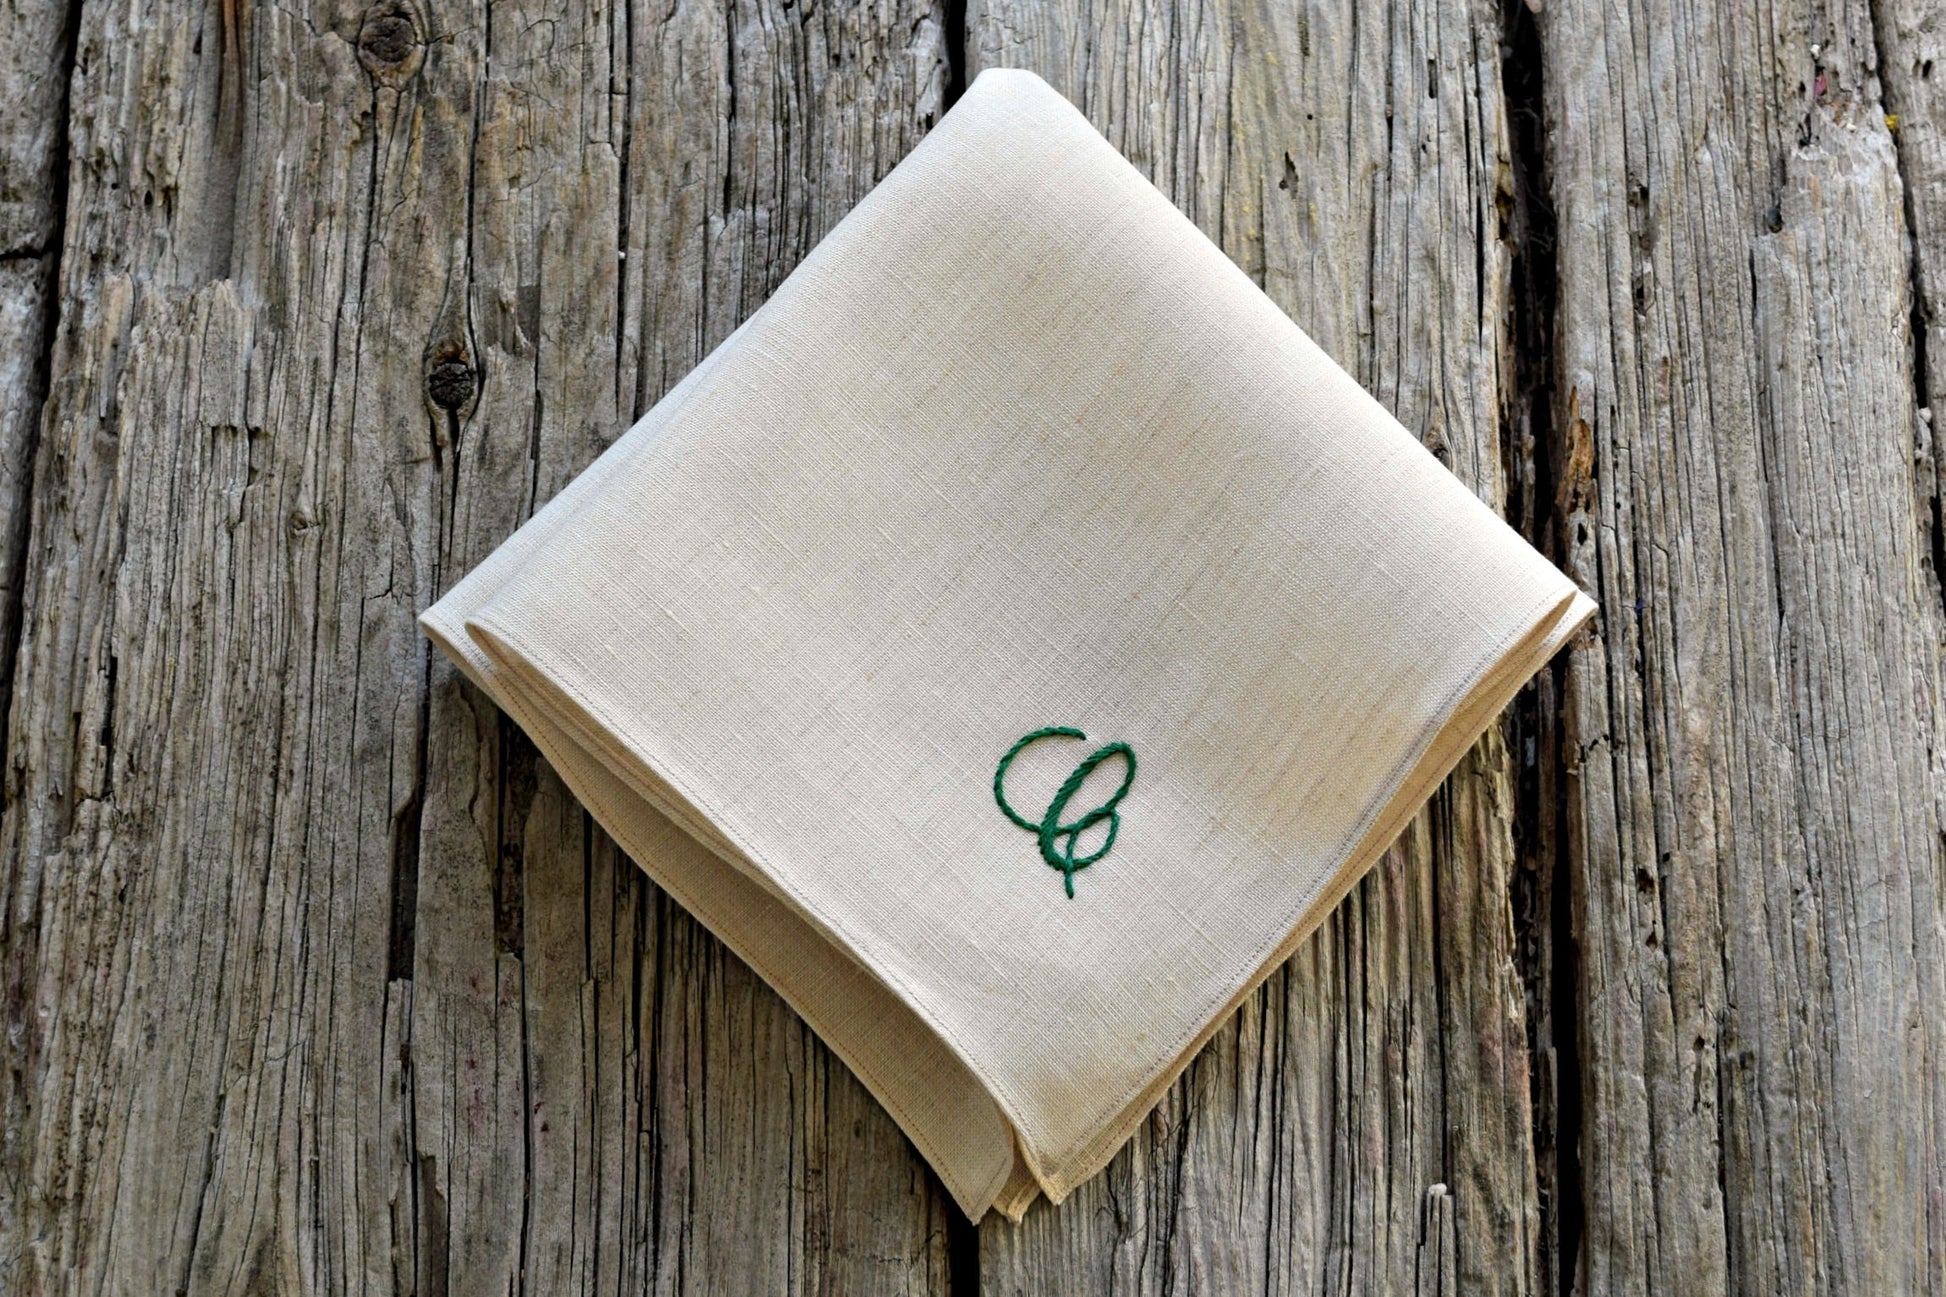 Folded oatmeal linen pocket square with letter embroidered in one corner in green